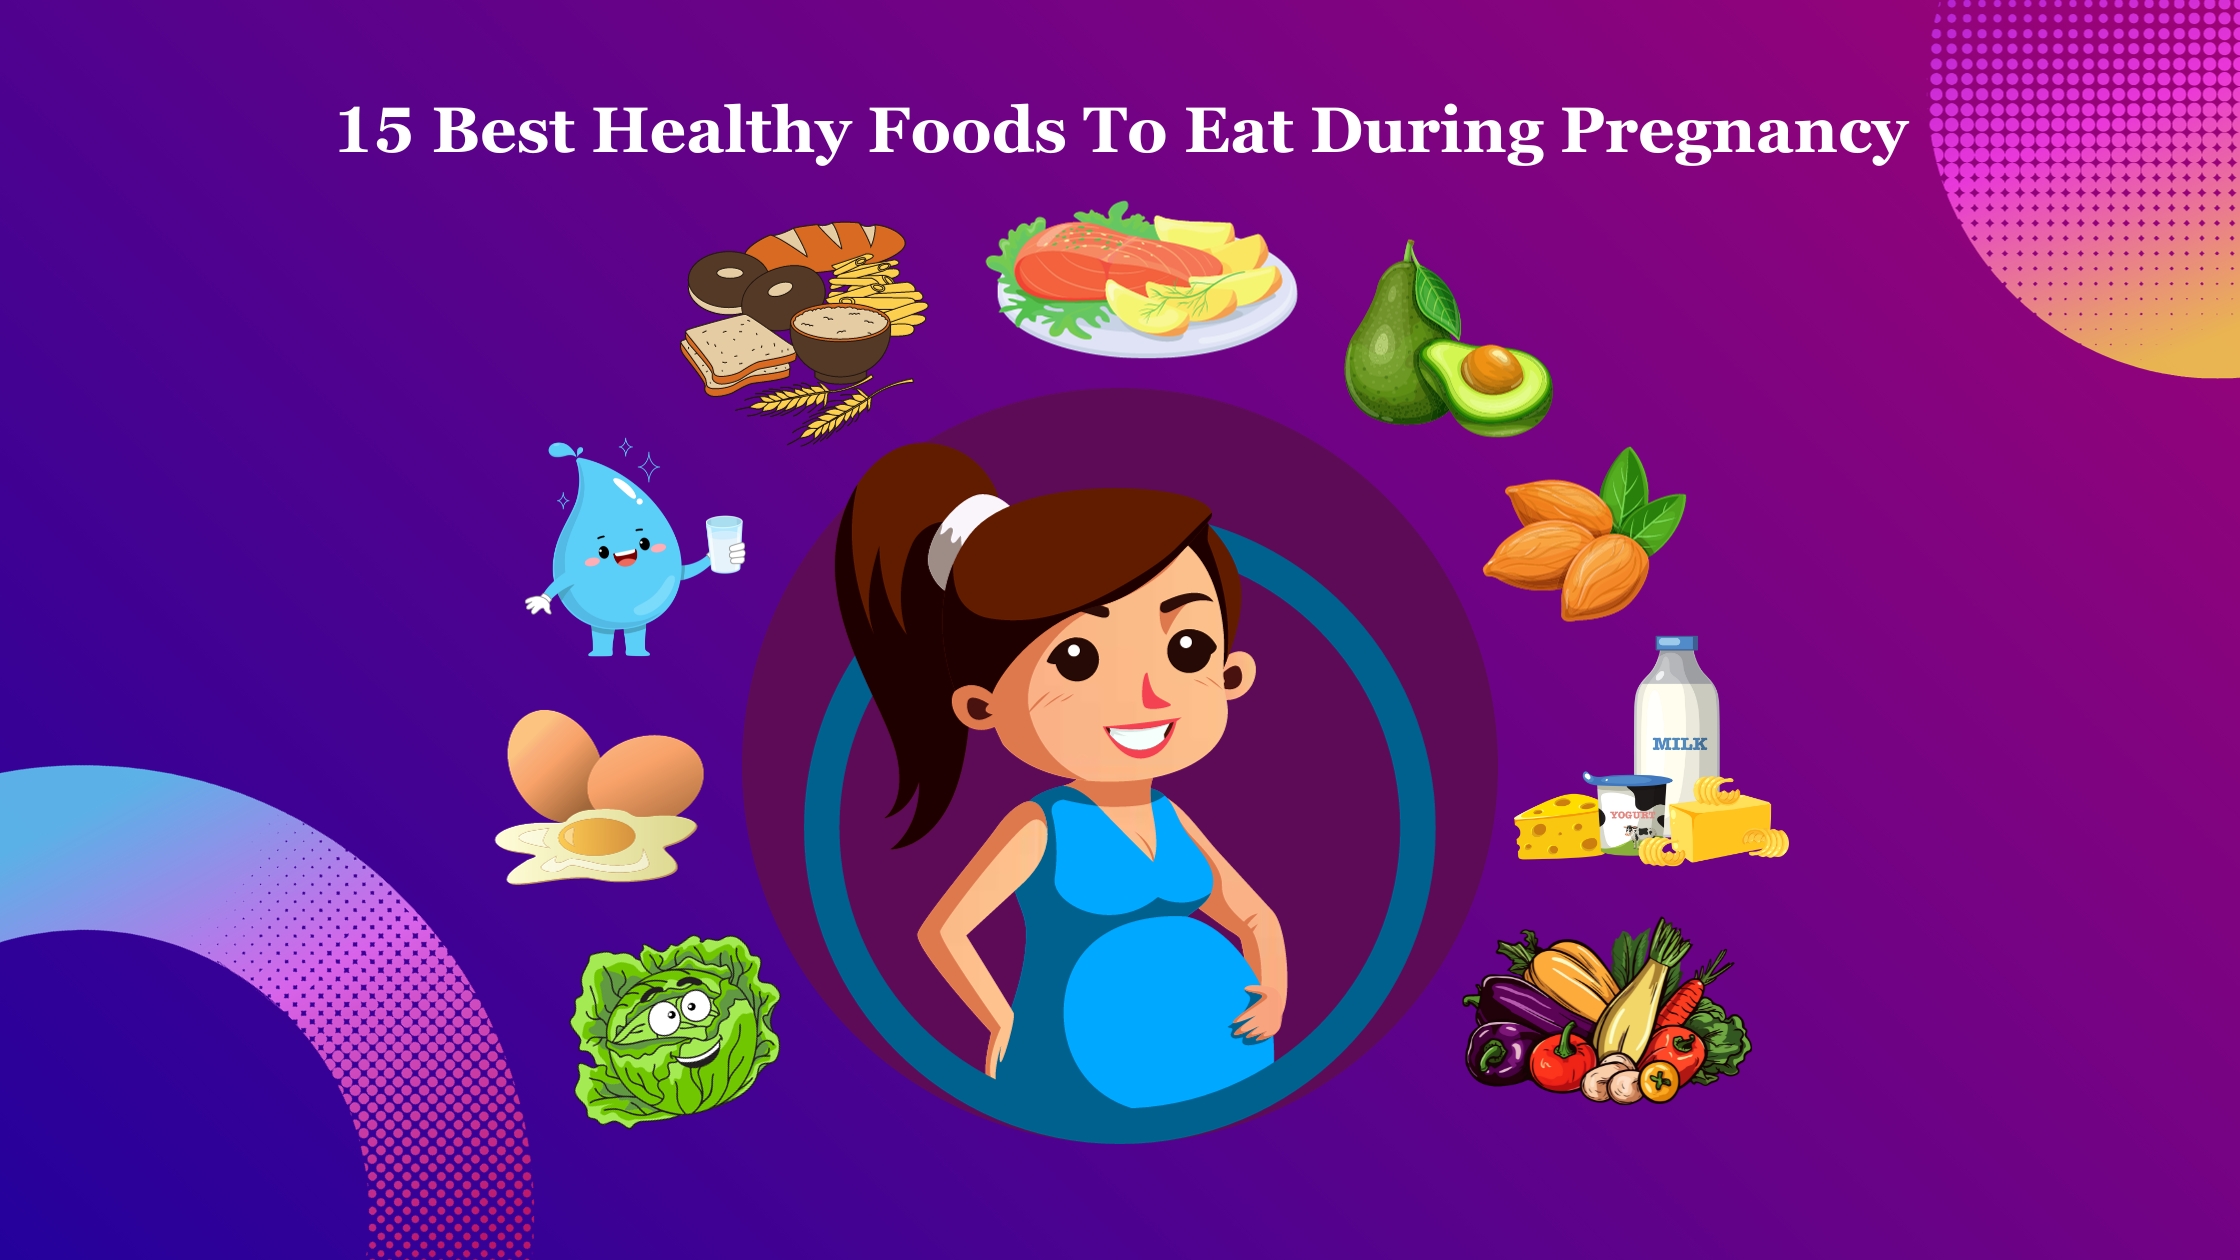 15 Best Healthy Foods To Eat During Pregnancy image